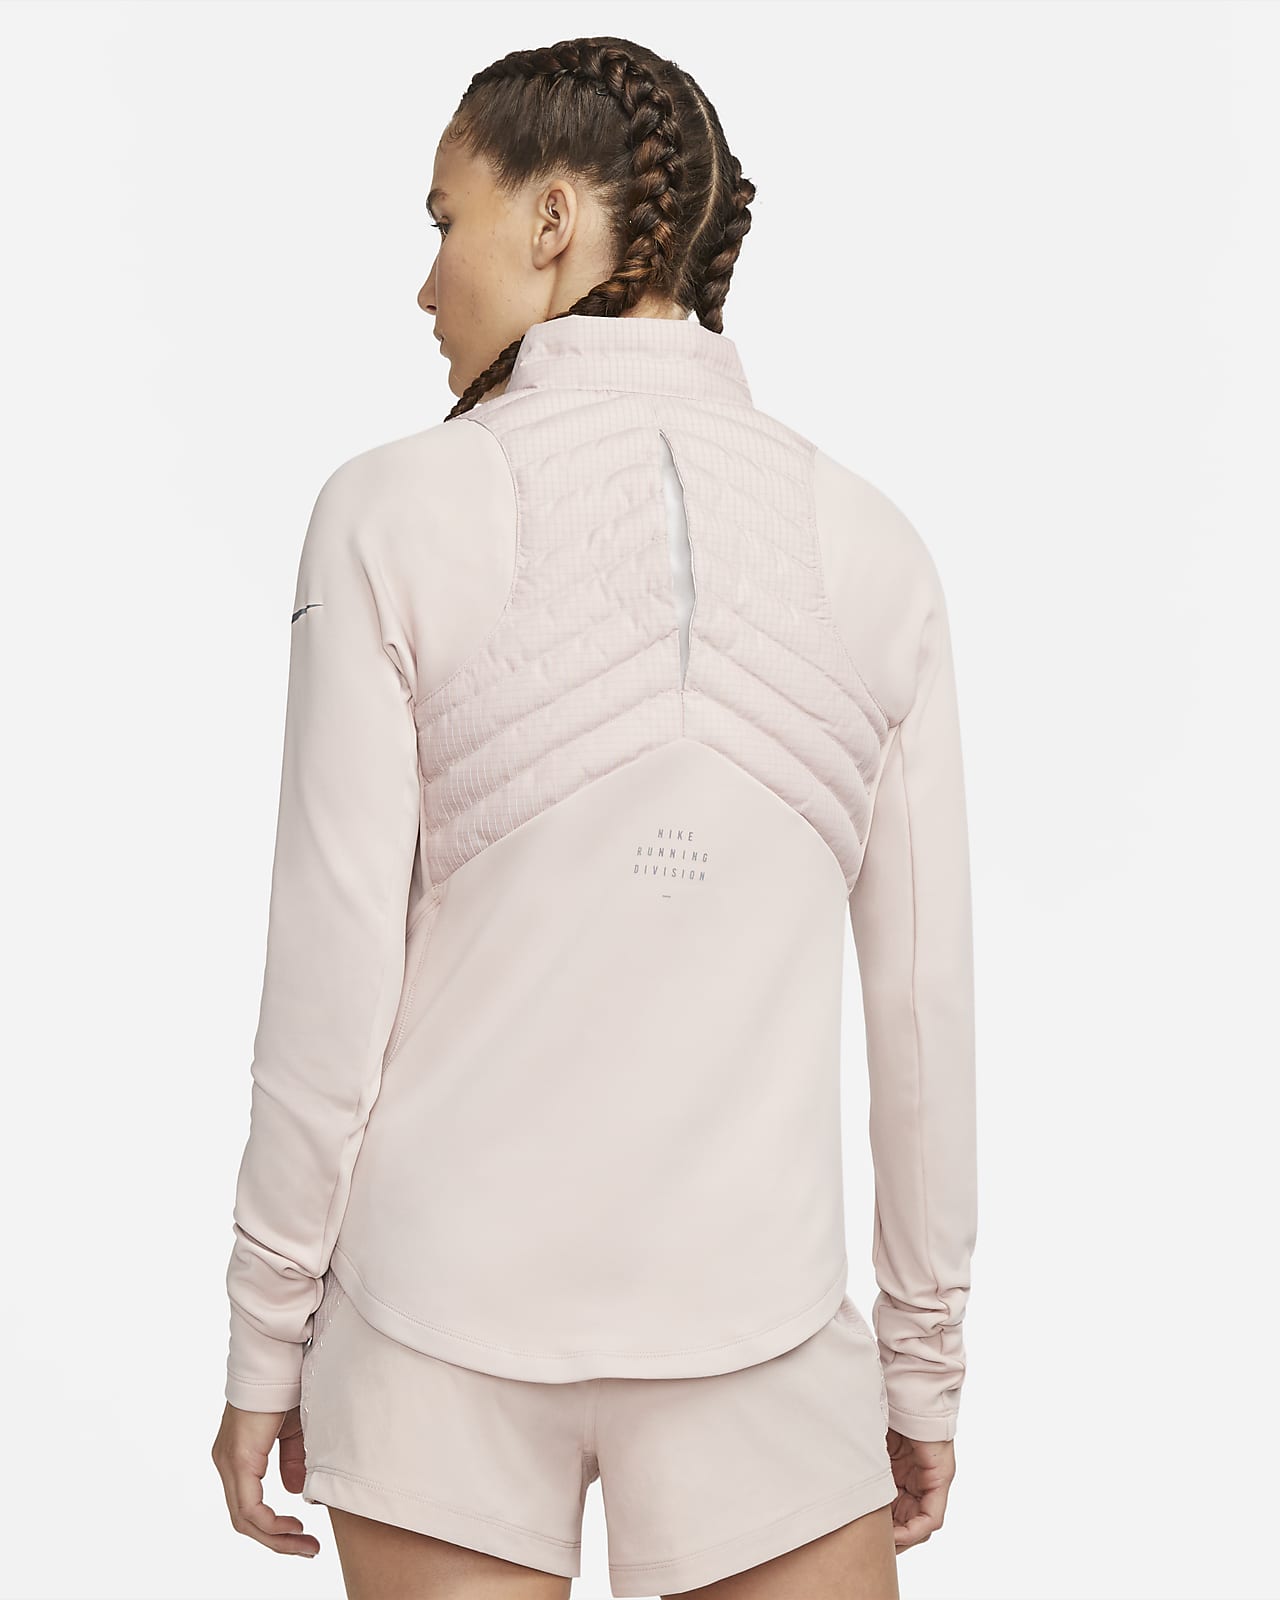 Therma-FIT Hybrid Running Jacket